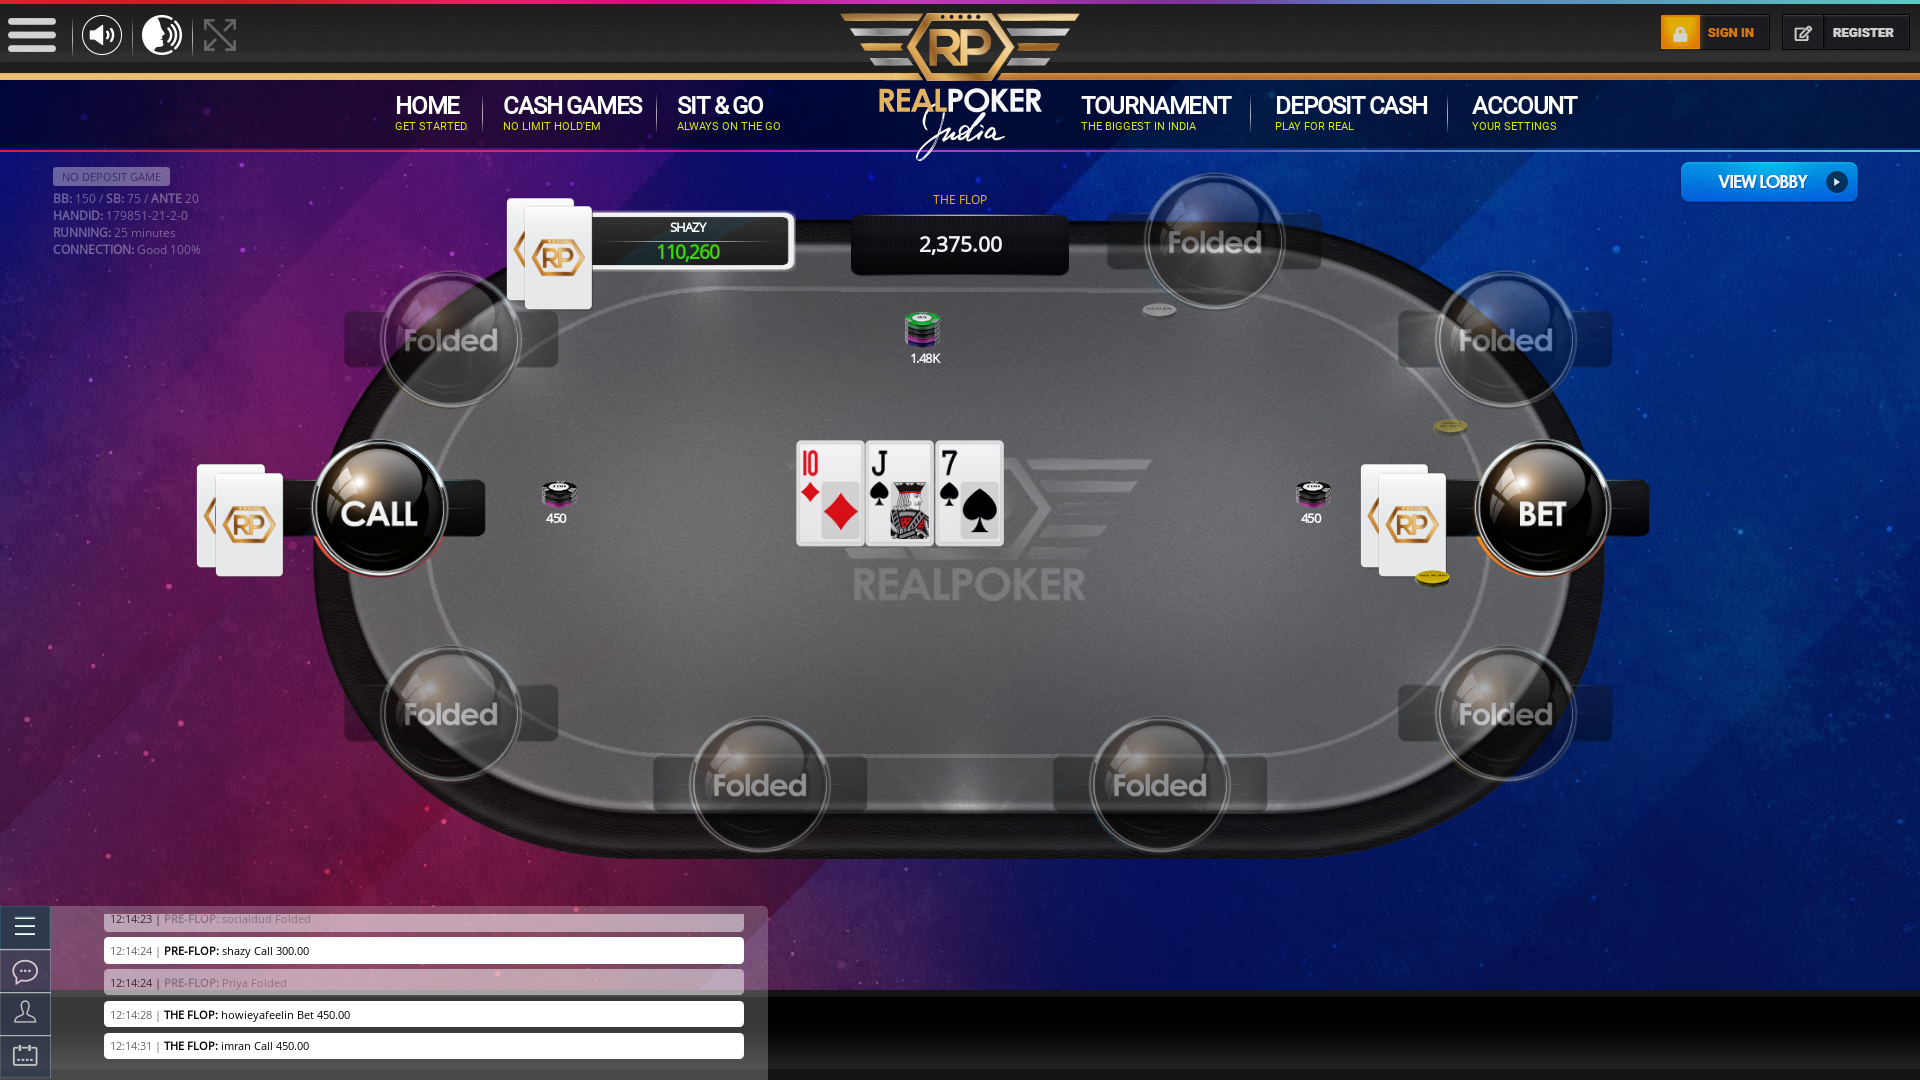 Online poker on a 10 player table in the 24th minute match up